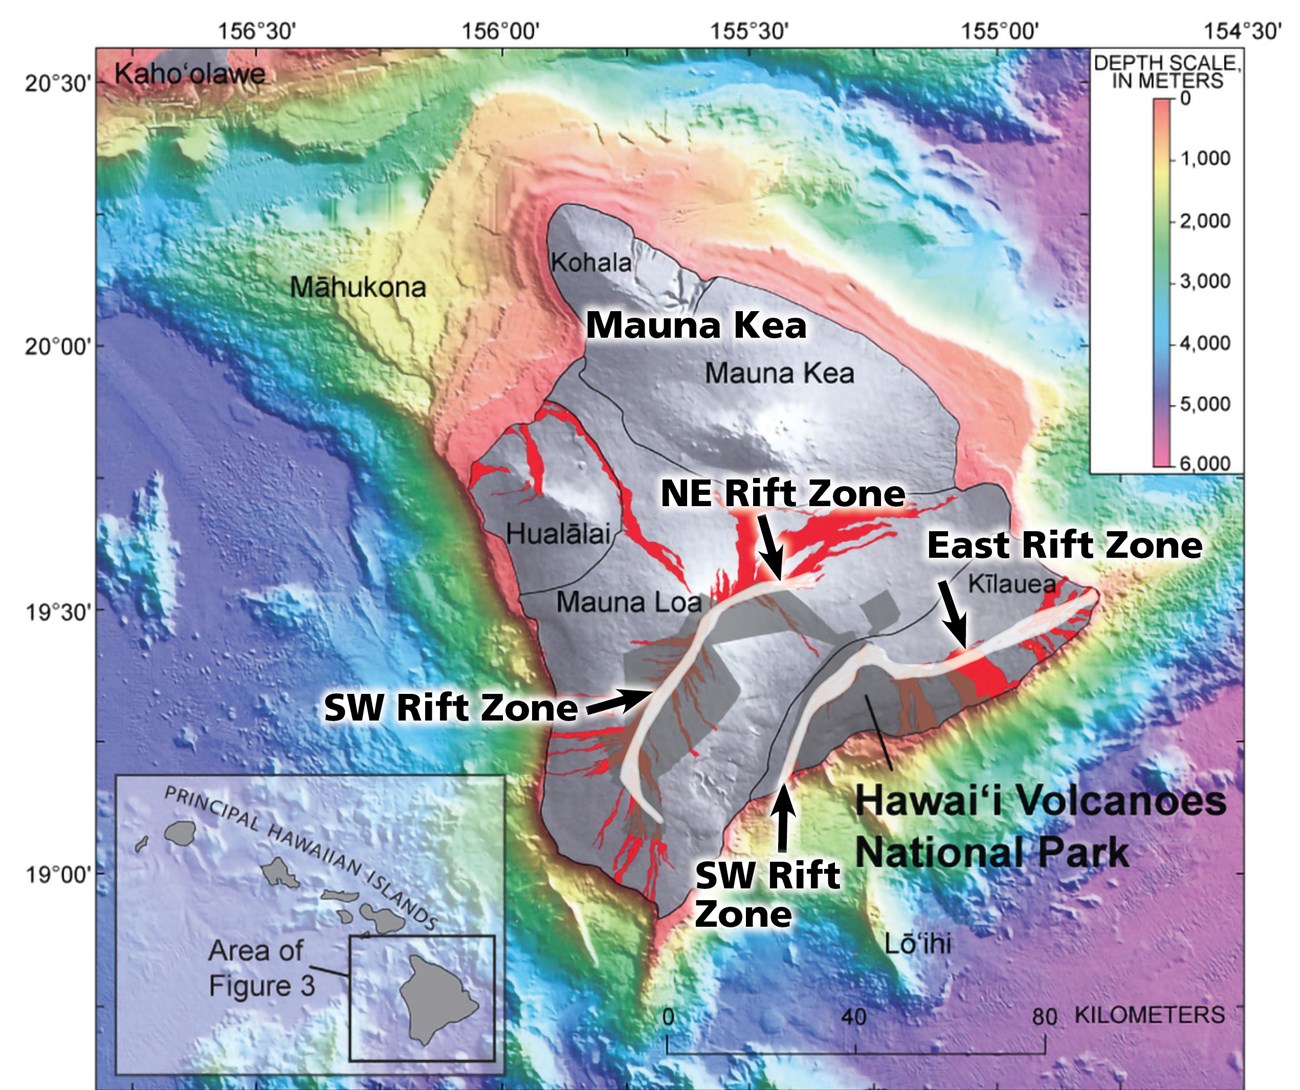 map of Hawaii showing the volcanic peaks and rift zones